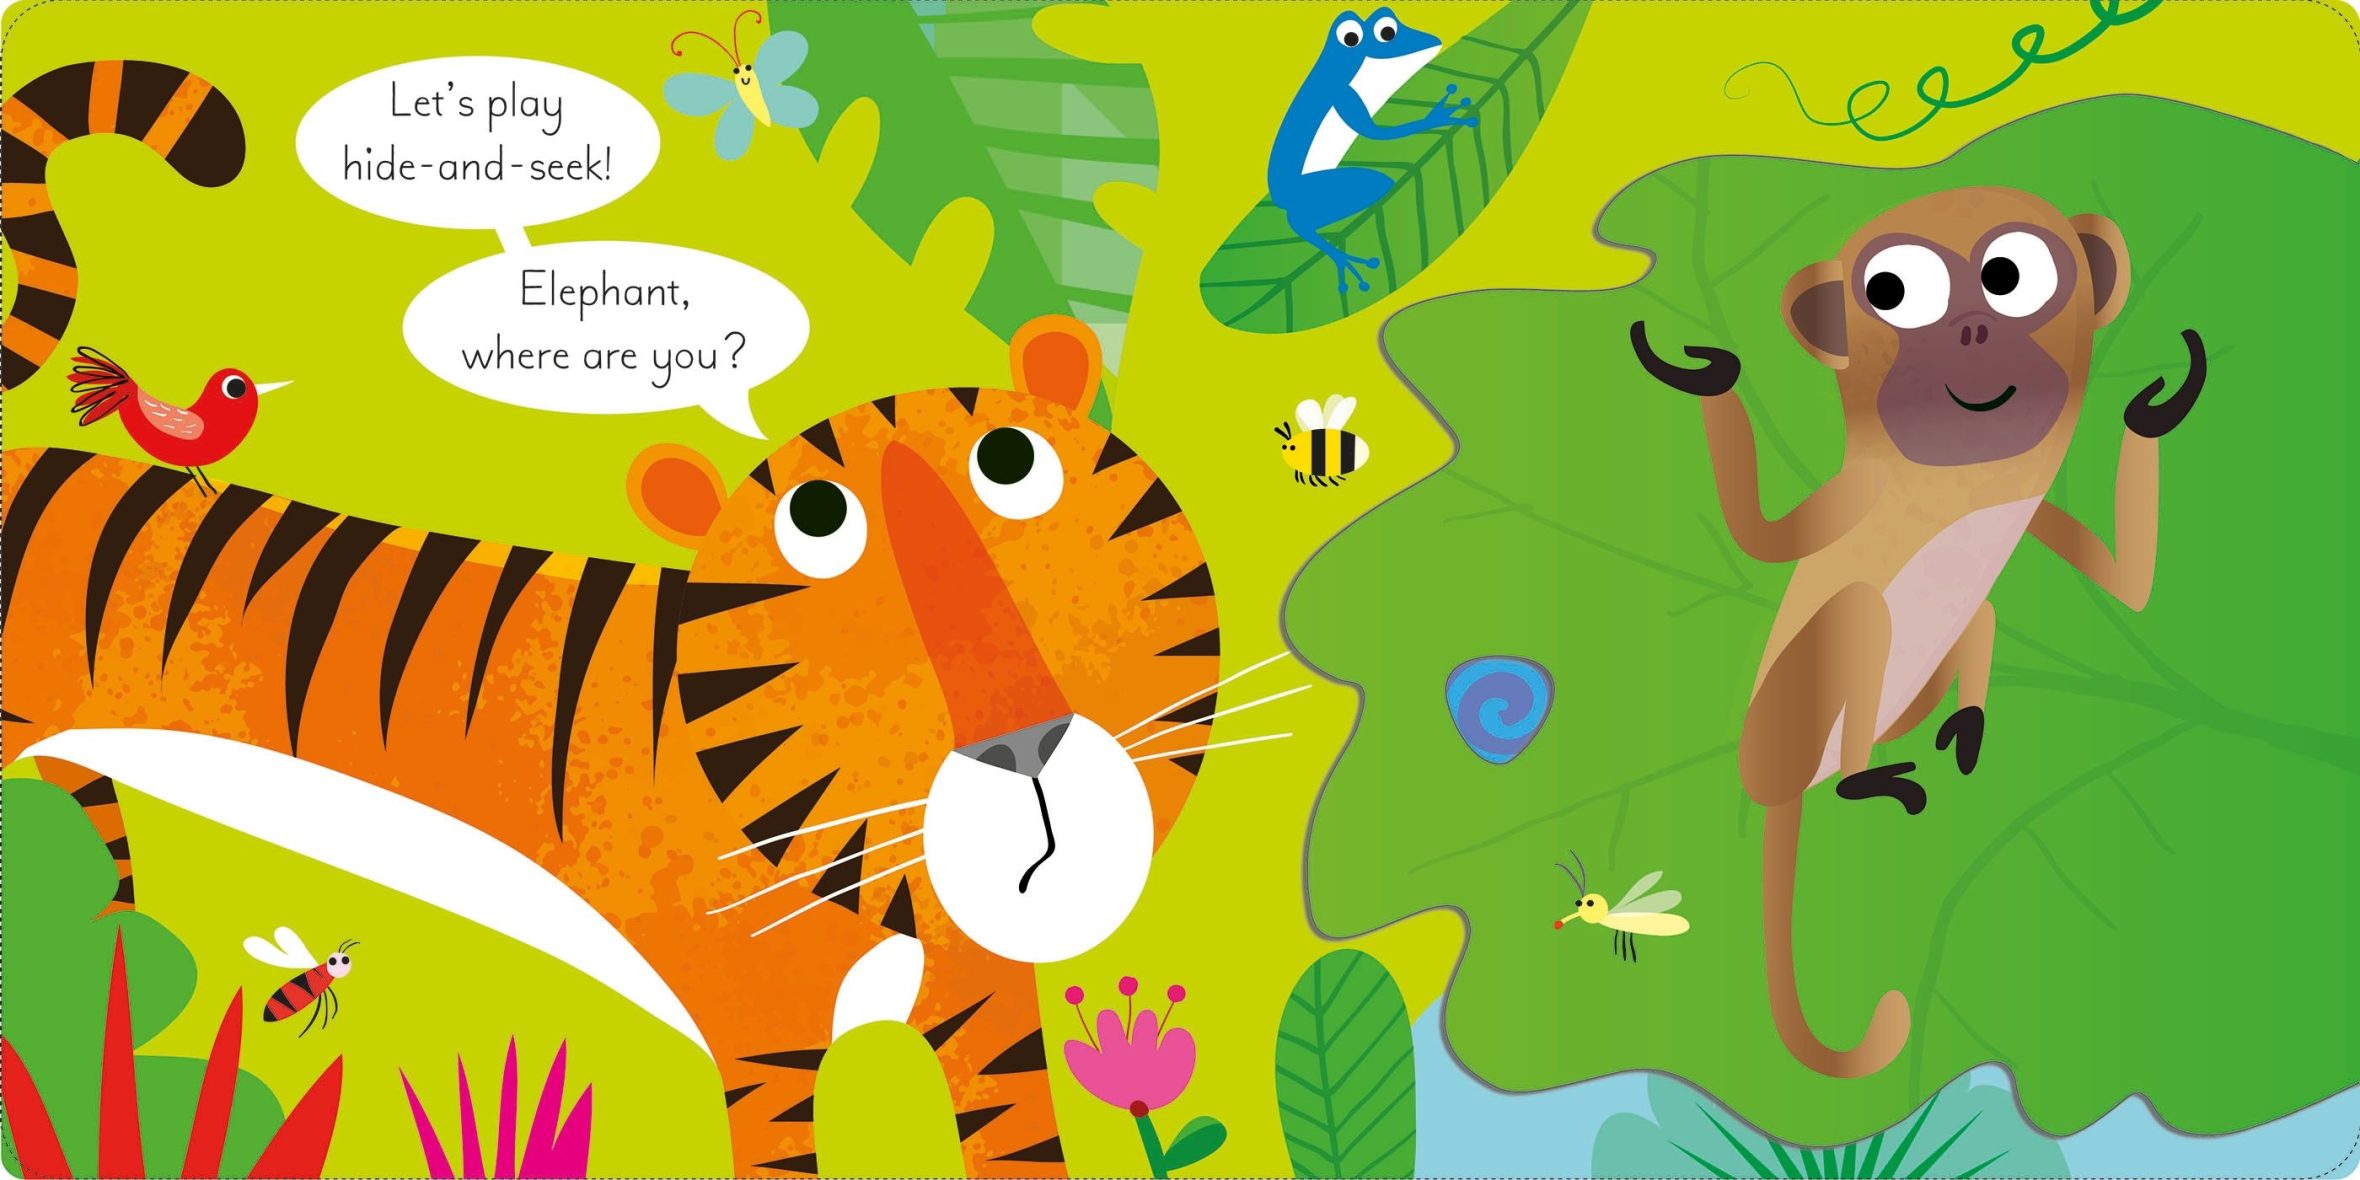 usborne-play-hide-and-seek-with-tiger-1